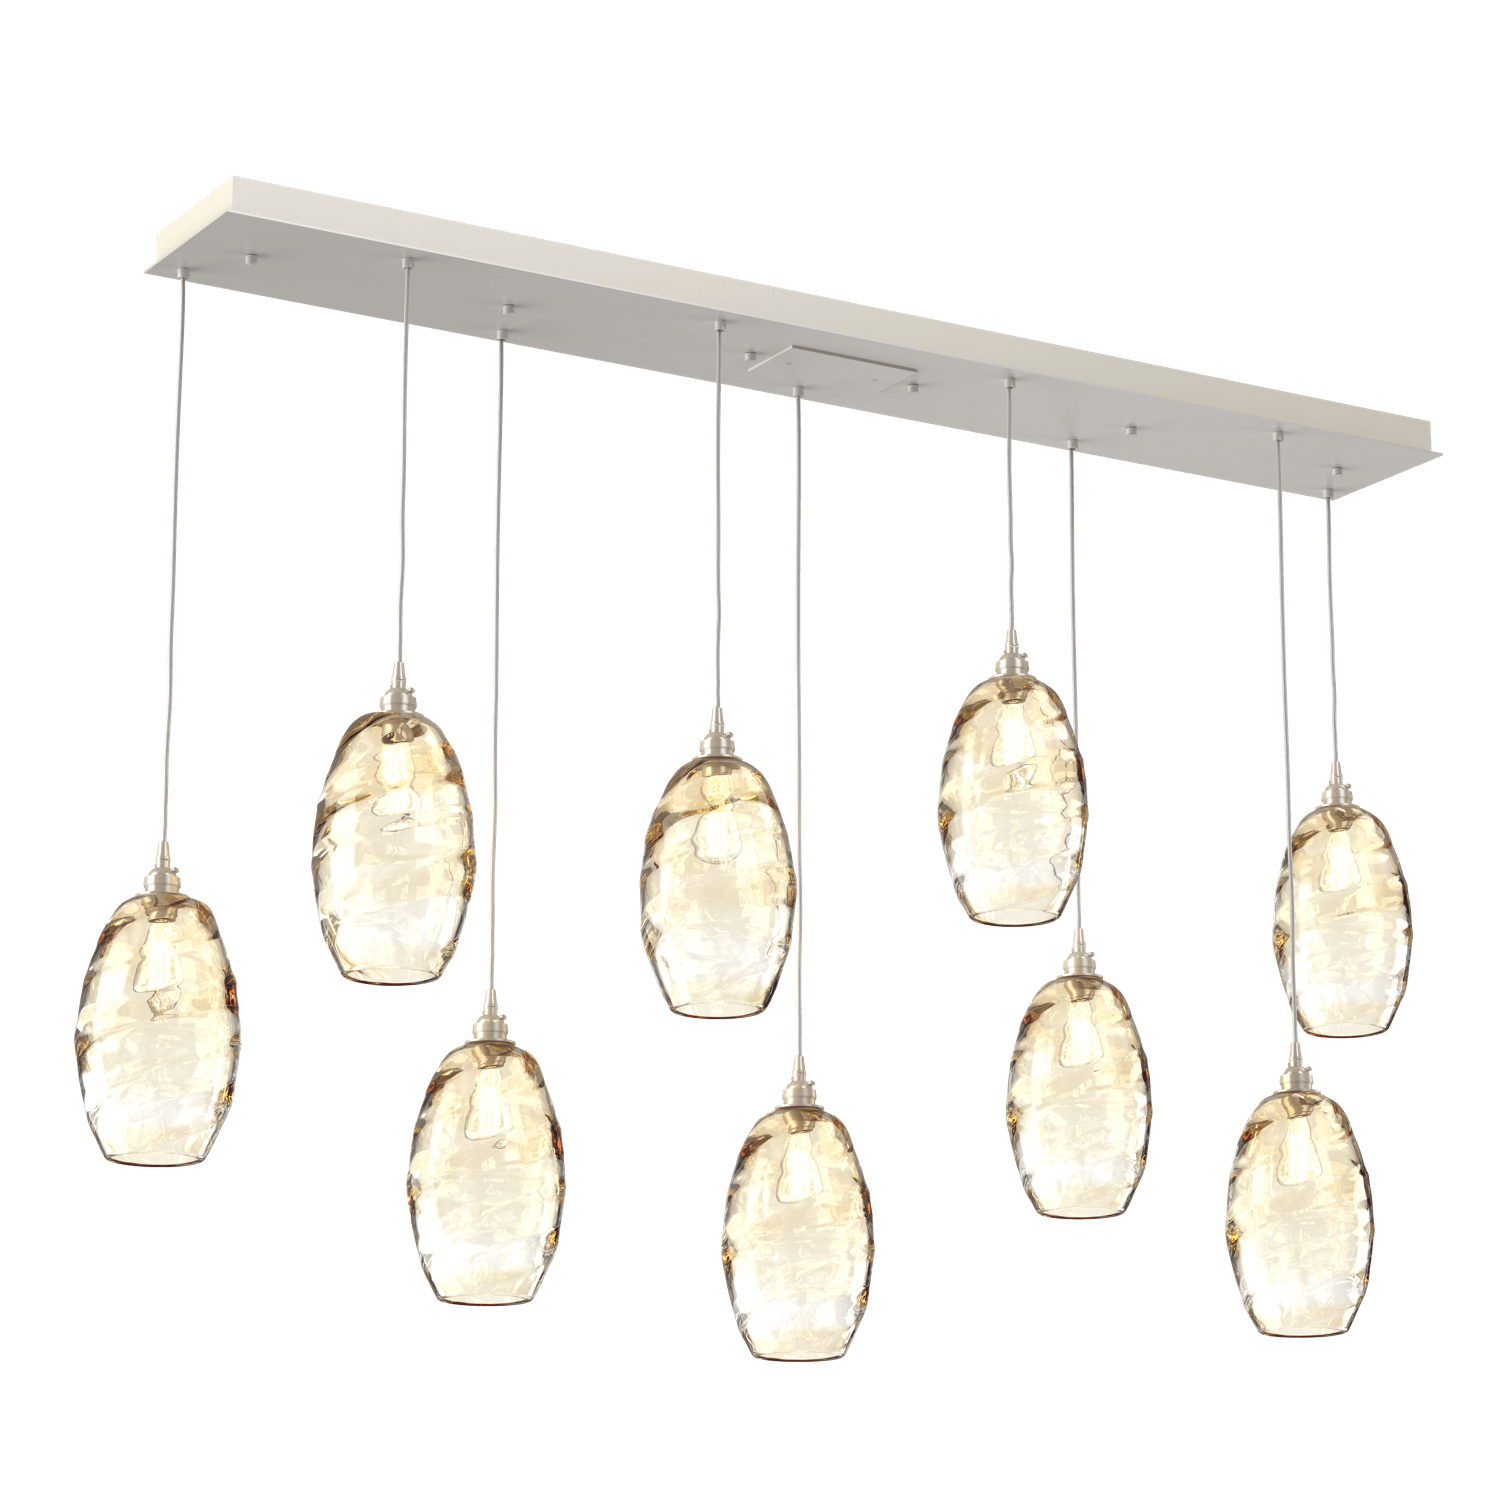 PLB0035-09-BS-OA-Hammerton-Studio-Optic-Blown-Glass-Elisse-9-light-linear-pendant-chandelier-with-metallic-beige-silver-finish-and-optic-amber-blown-glass-shades-and-incandescent-lamping